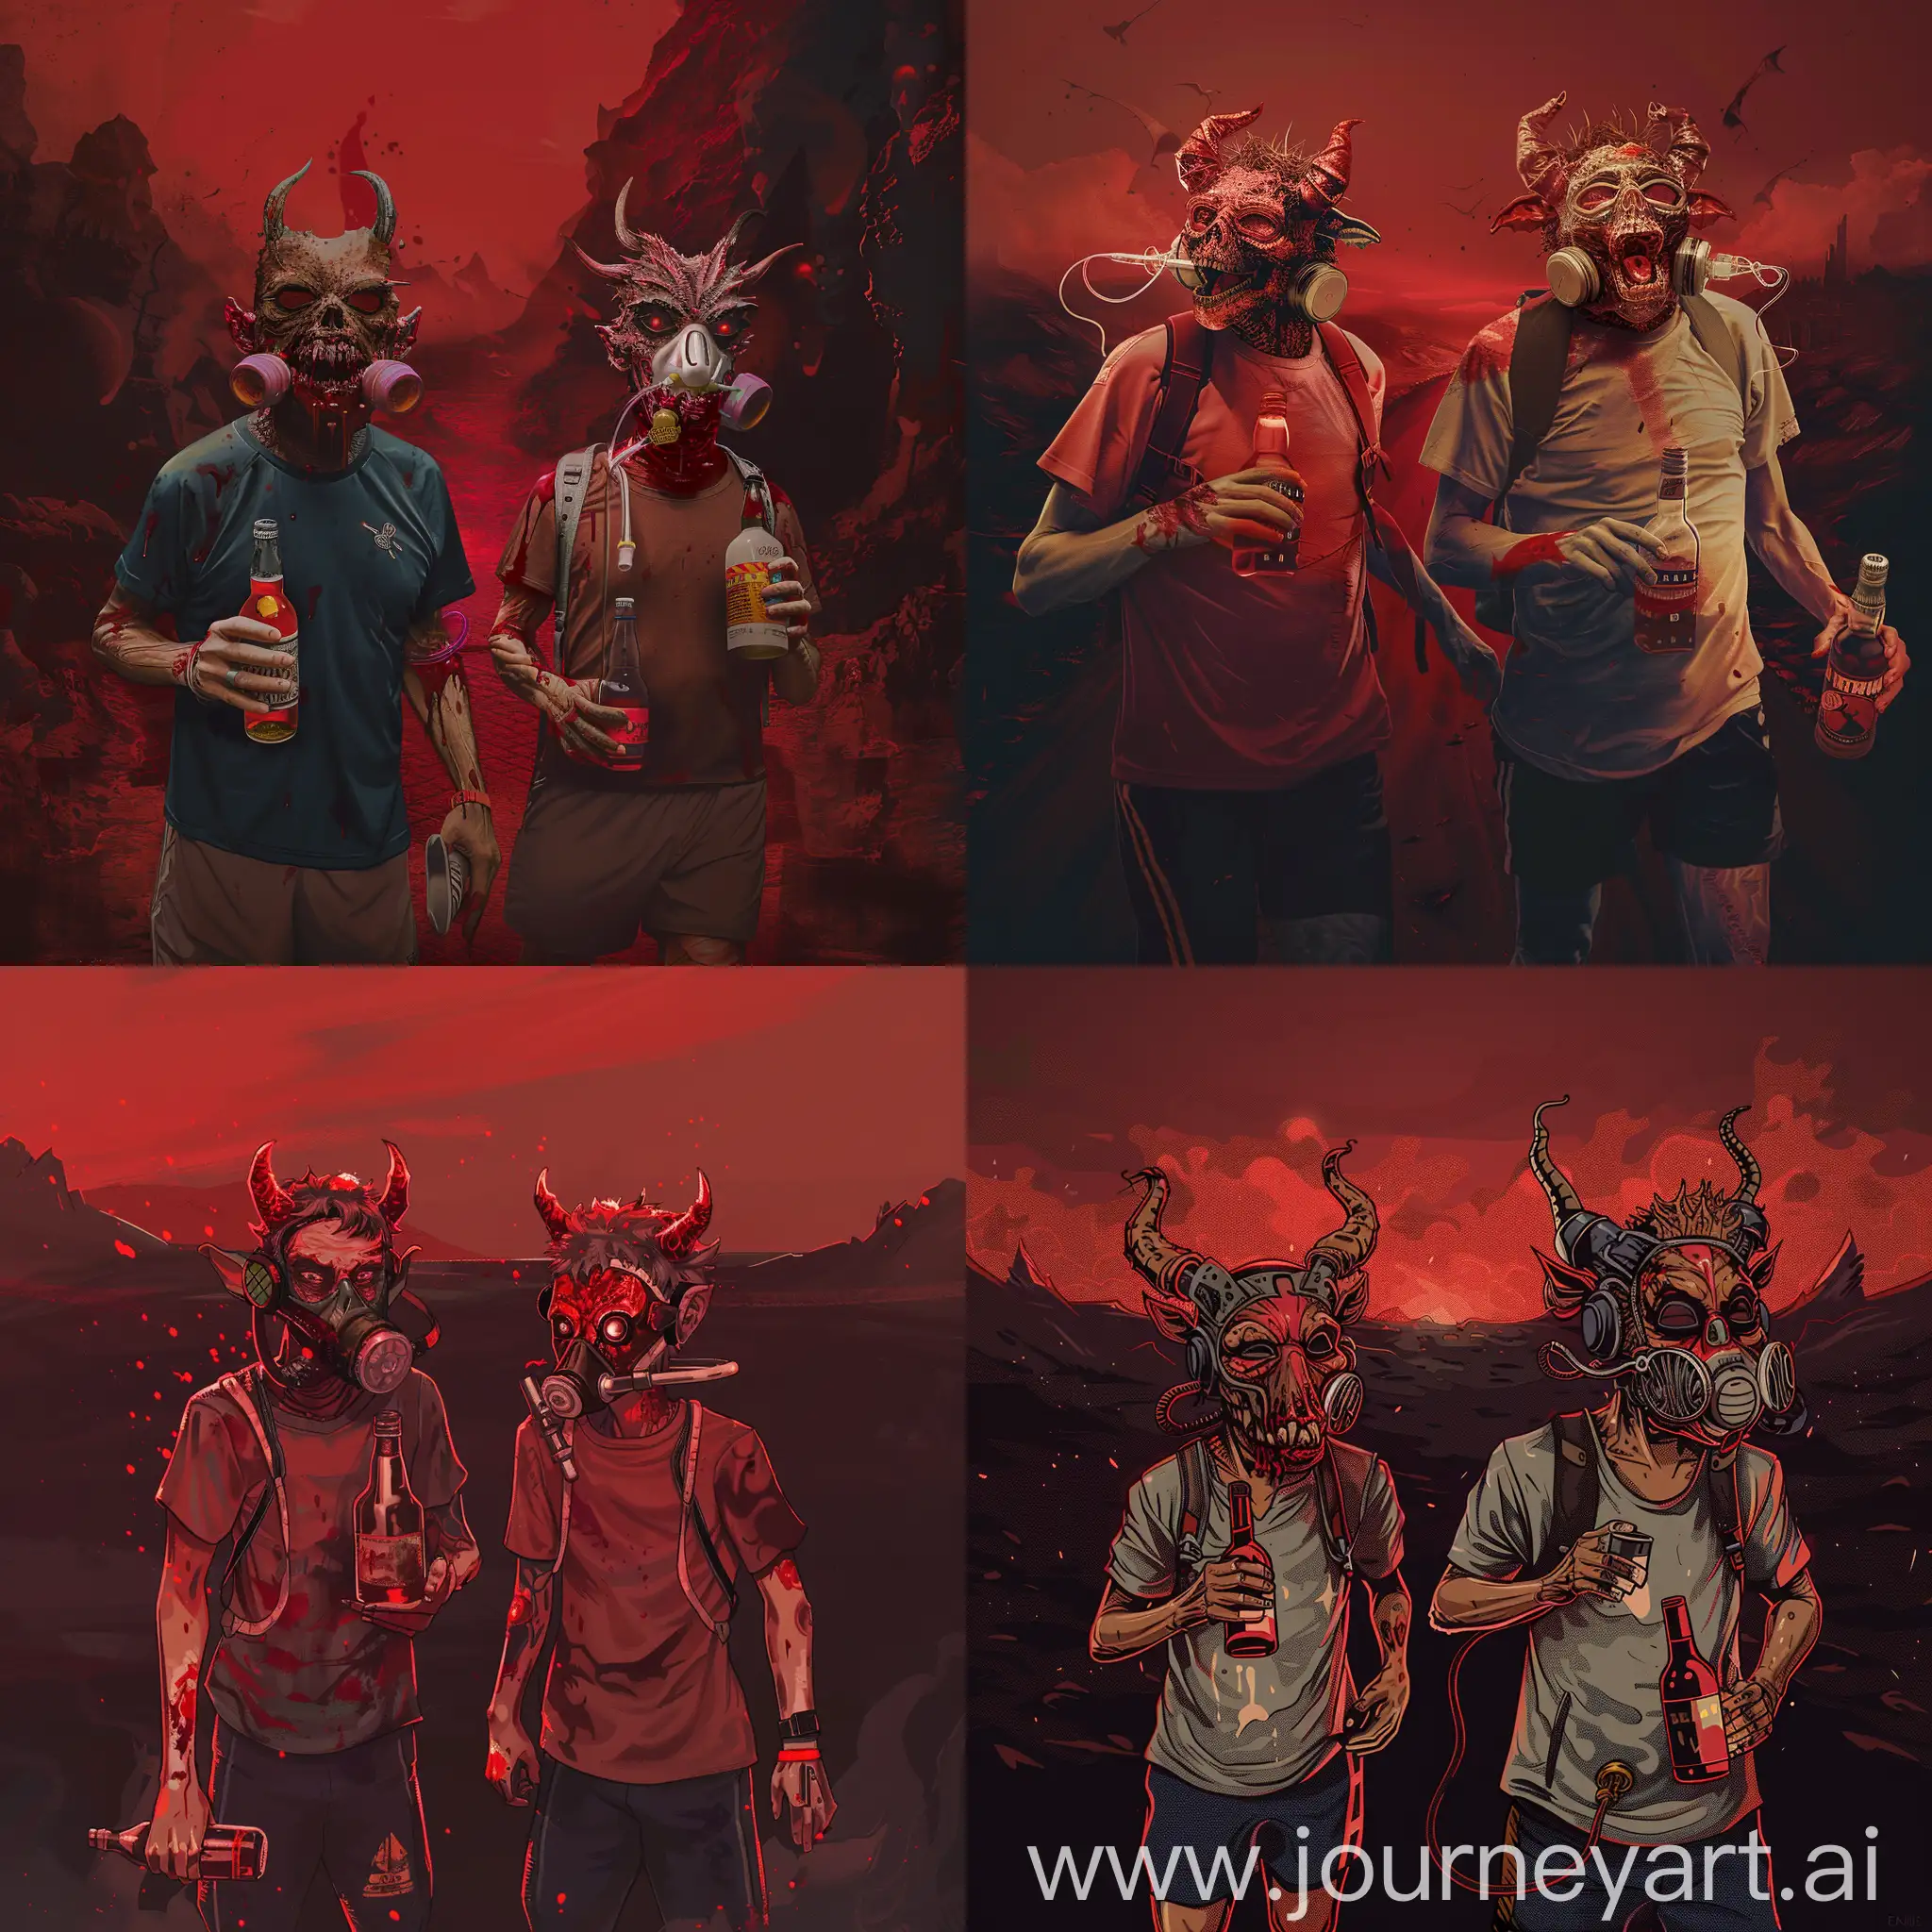 Lost-Souls-in-a-Desolate-Hell-Human-Figures-in-Demon-Masks-with-Alcohol-Bottles